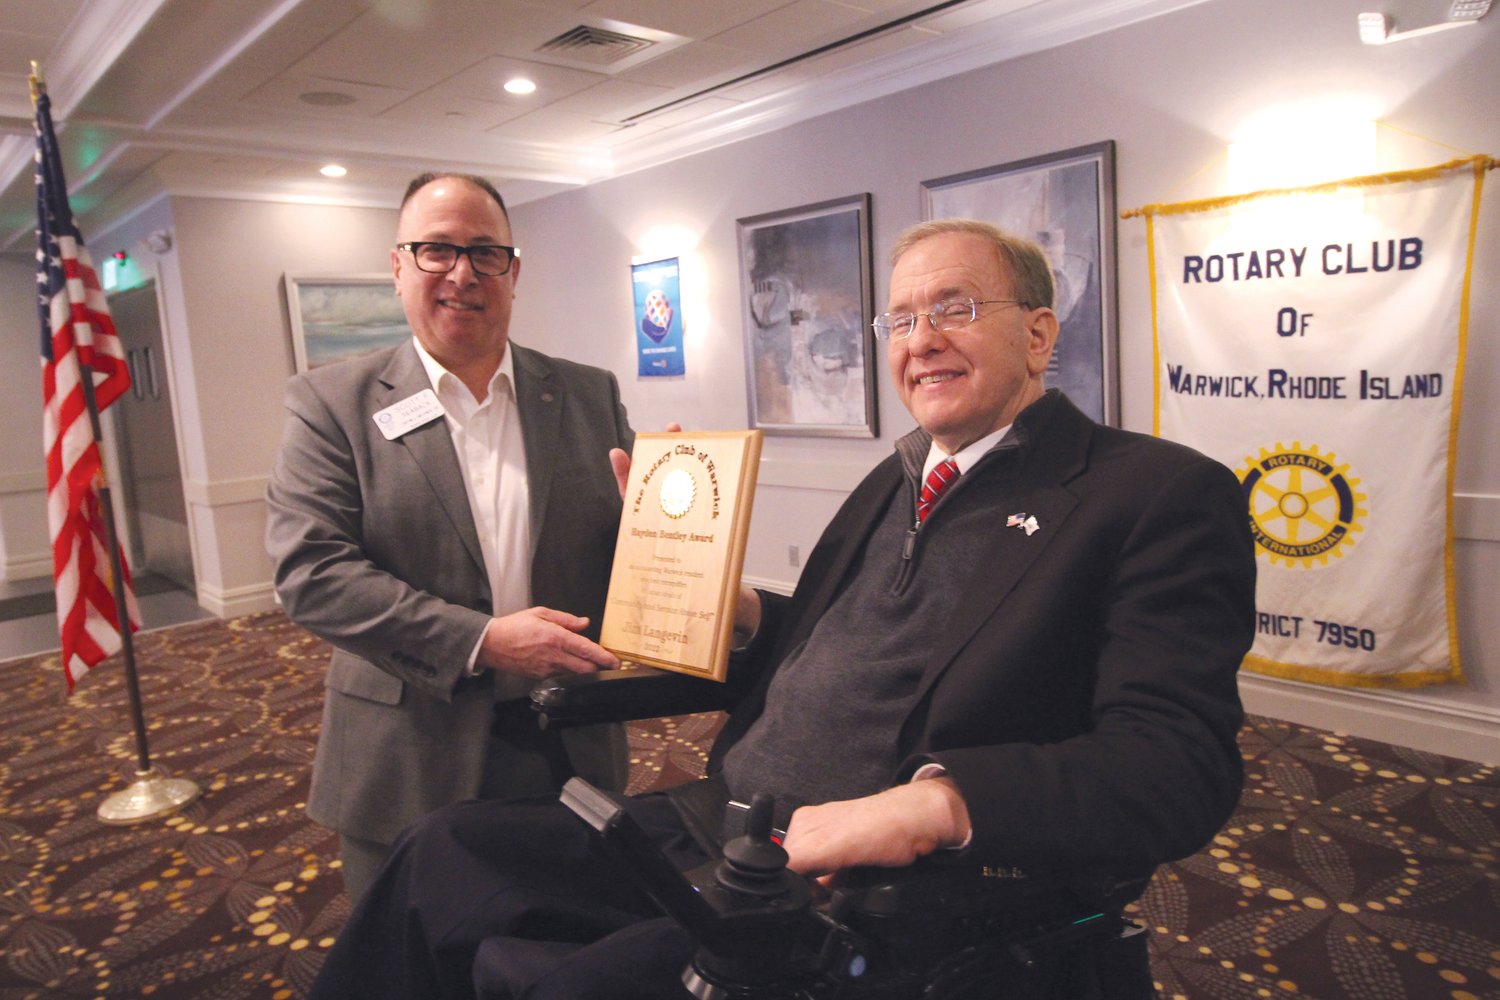 IN RECOGNITION OF SERVICE: Warwick Rotary vice president Scott Seaback presents Congressman Langevin with the club’s
Hayden Bentley Award. Named after a founding member of the club, the award is given to a member of the community who personifies
the Rotary motto of “service above self.”